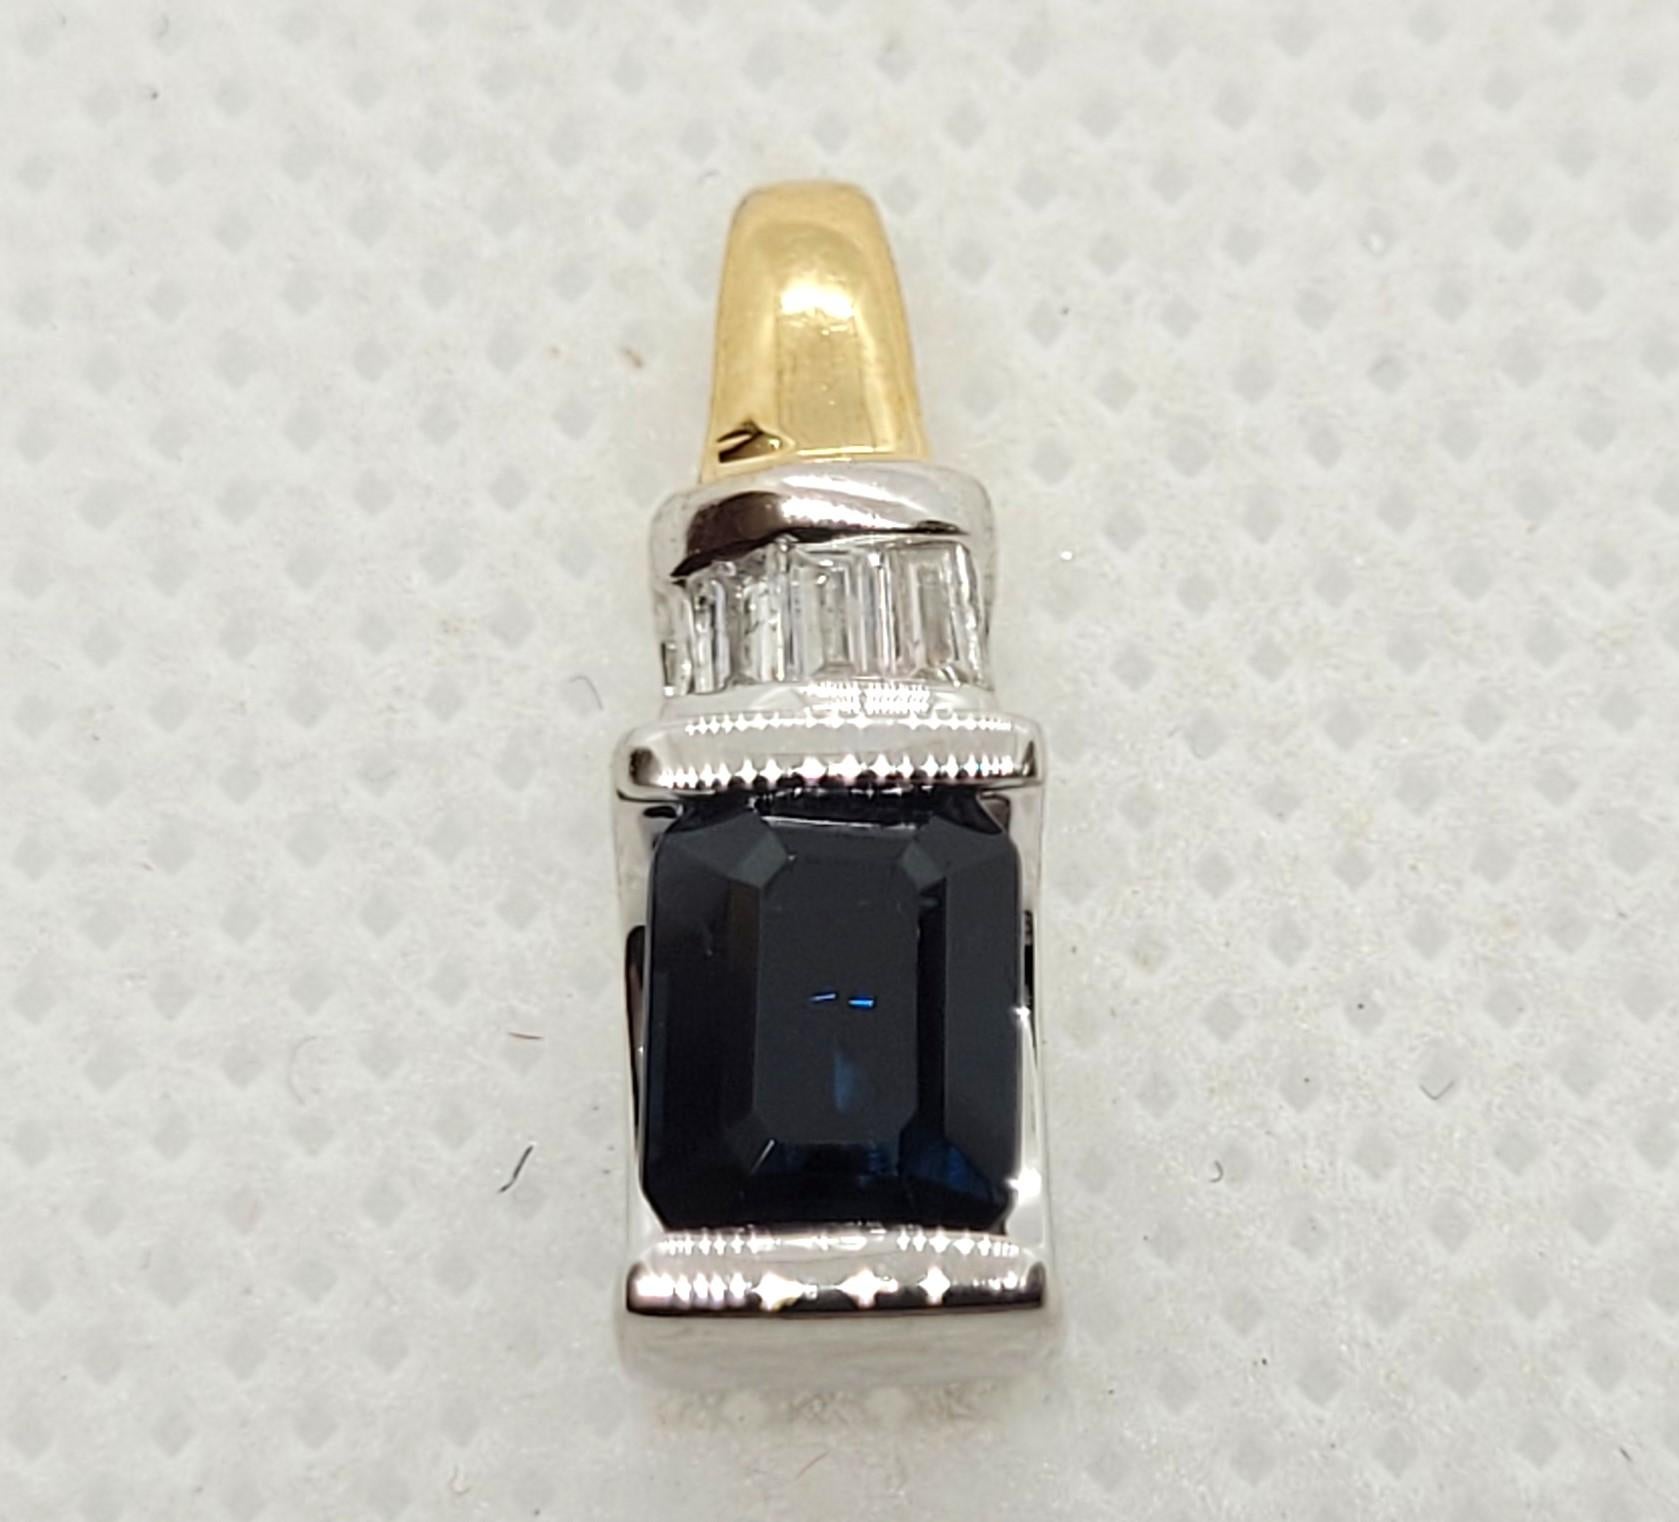 14kt Two-Tone Gold 1.00Ct Emerald Cut Sapphire .10cttw Baguette Diamond Pendant. The pendant is 18mm x 6.10mm x 6.2mm stamped 14kt, weighing 2.3 grams.  Elevate your style with this exquisite 14kt two-tone pendant featuring a stunning channel-set